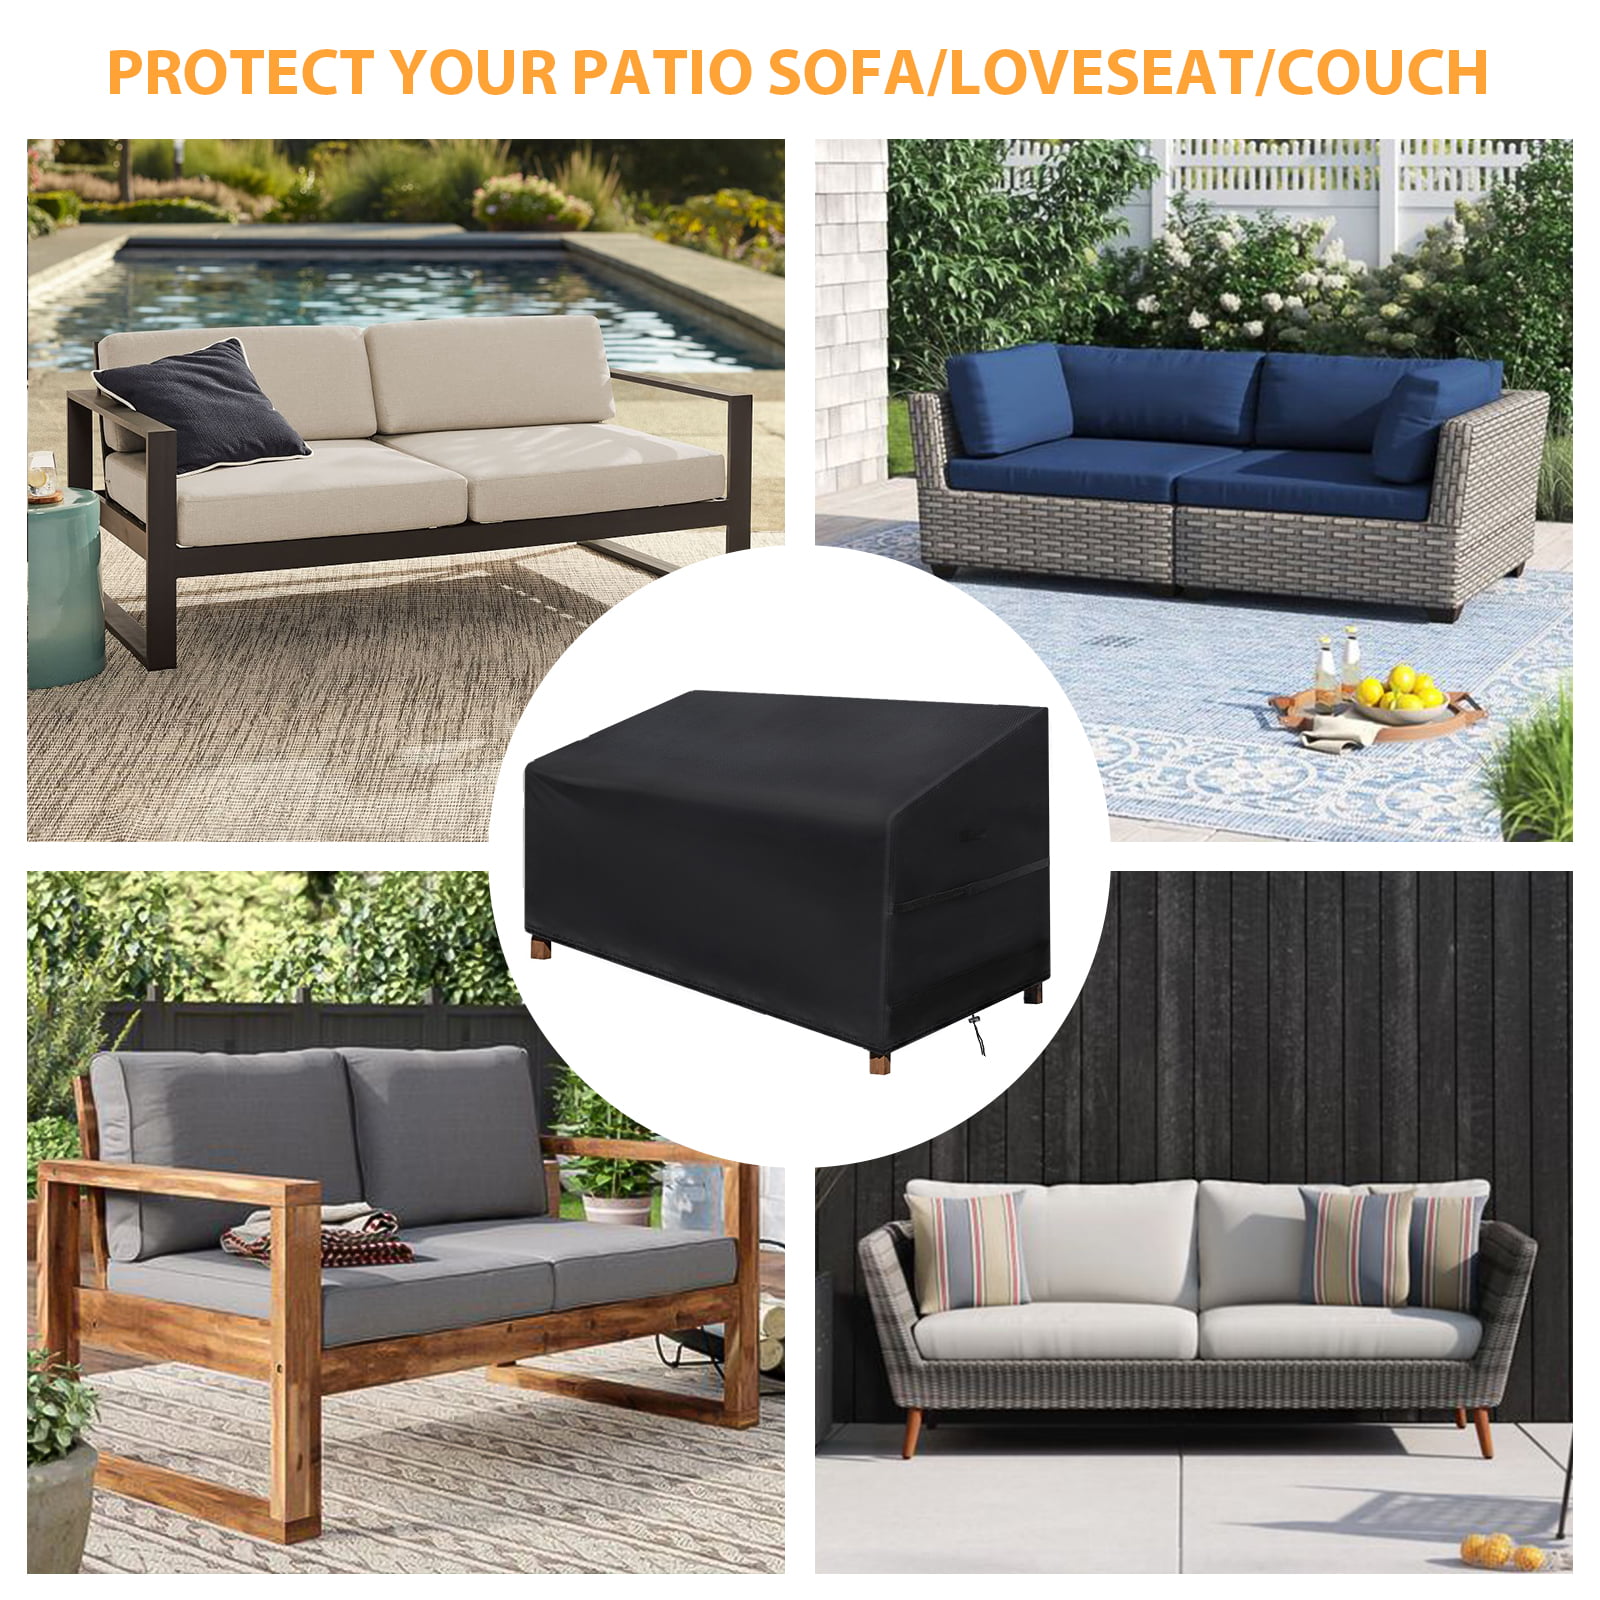 Deep Grey COZPLEN Waterproof Patio Sofa Cover 75.9’’W x32’’D x 33’’H 3-Seater Couch Cover for Outdoor Furniture 